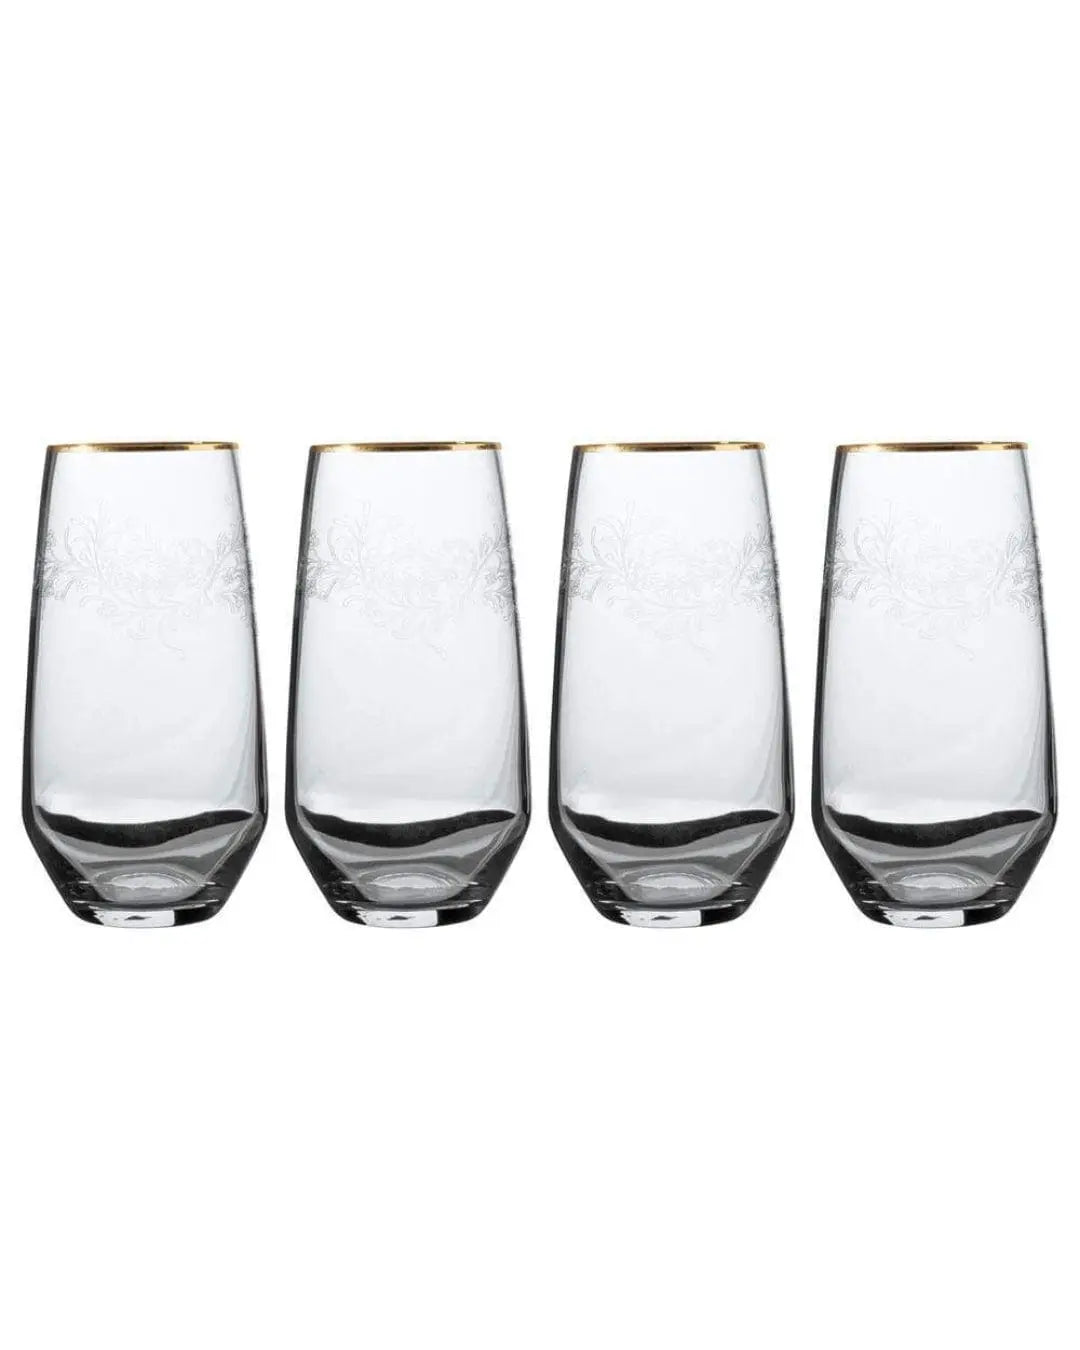 Victoria And Albert Cole High Ball Glasses Set Of 4 Tableware 5050993349360